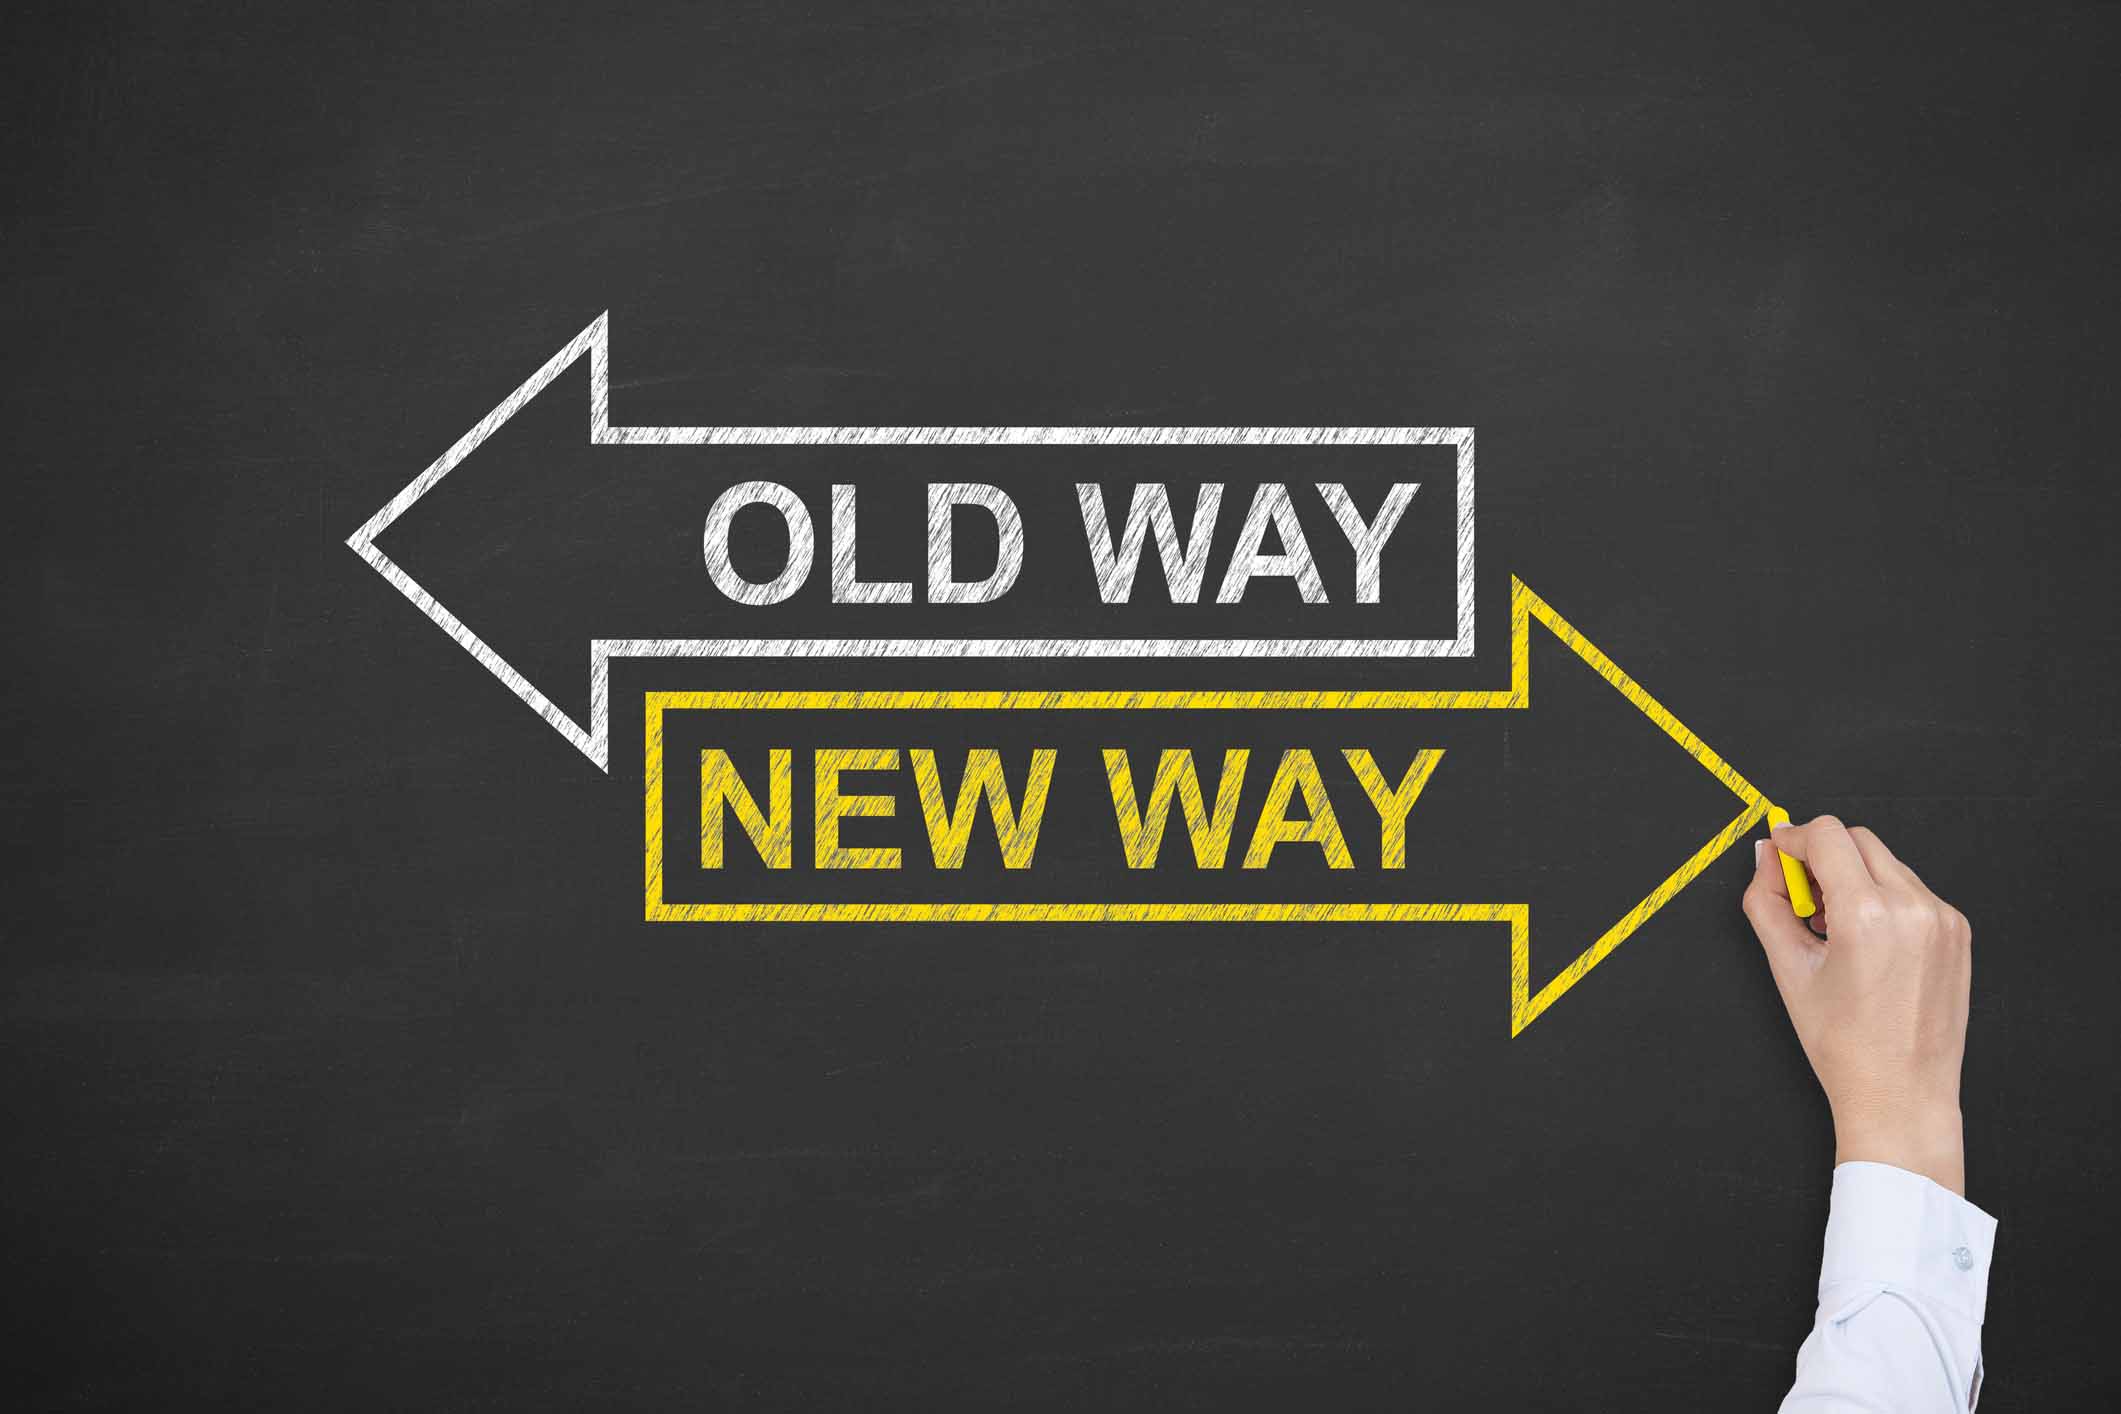 Found a new way to. New way. Картинка old way New way. New way логотип. Картинки changed.